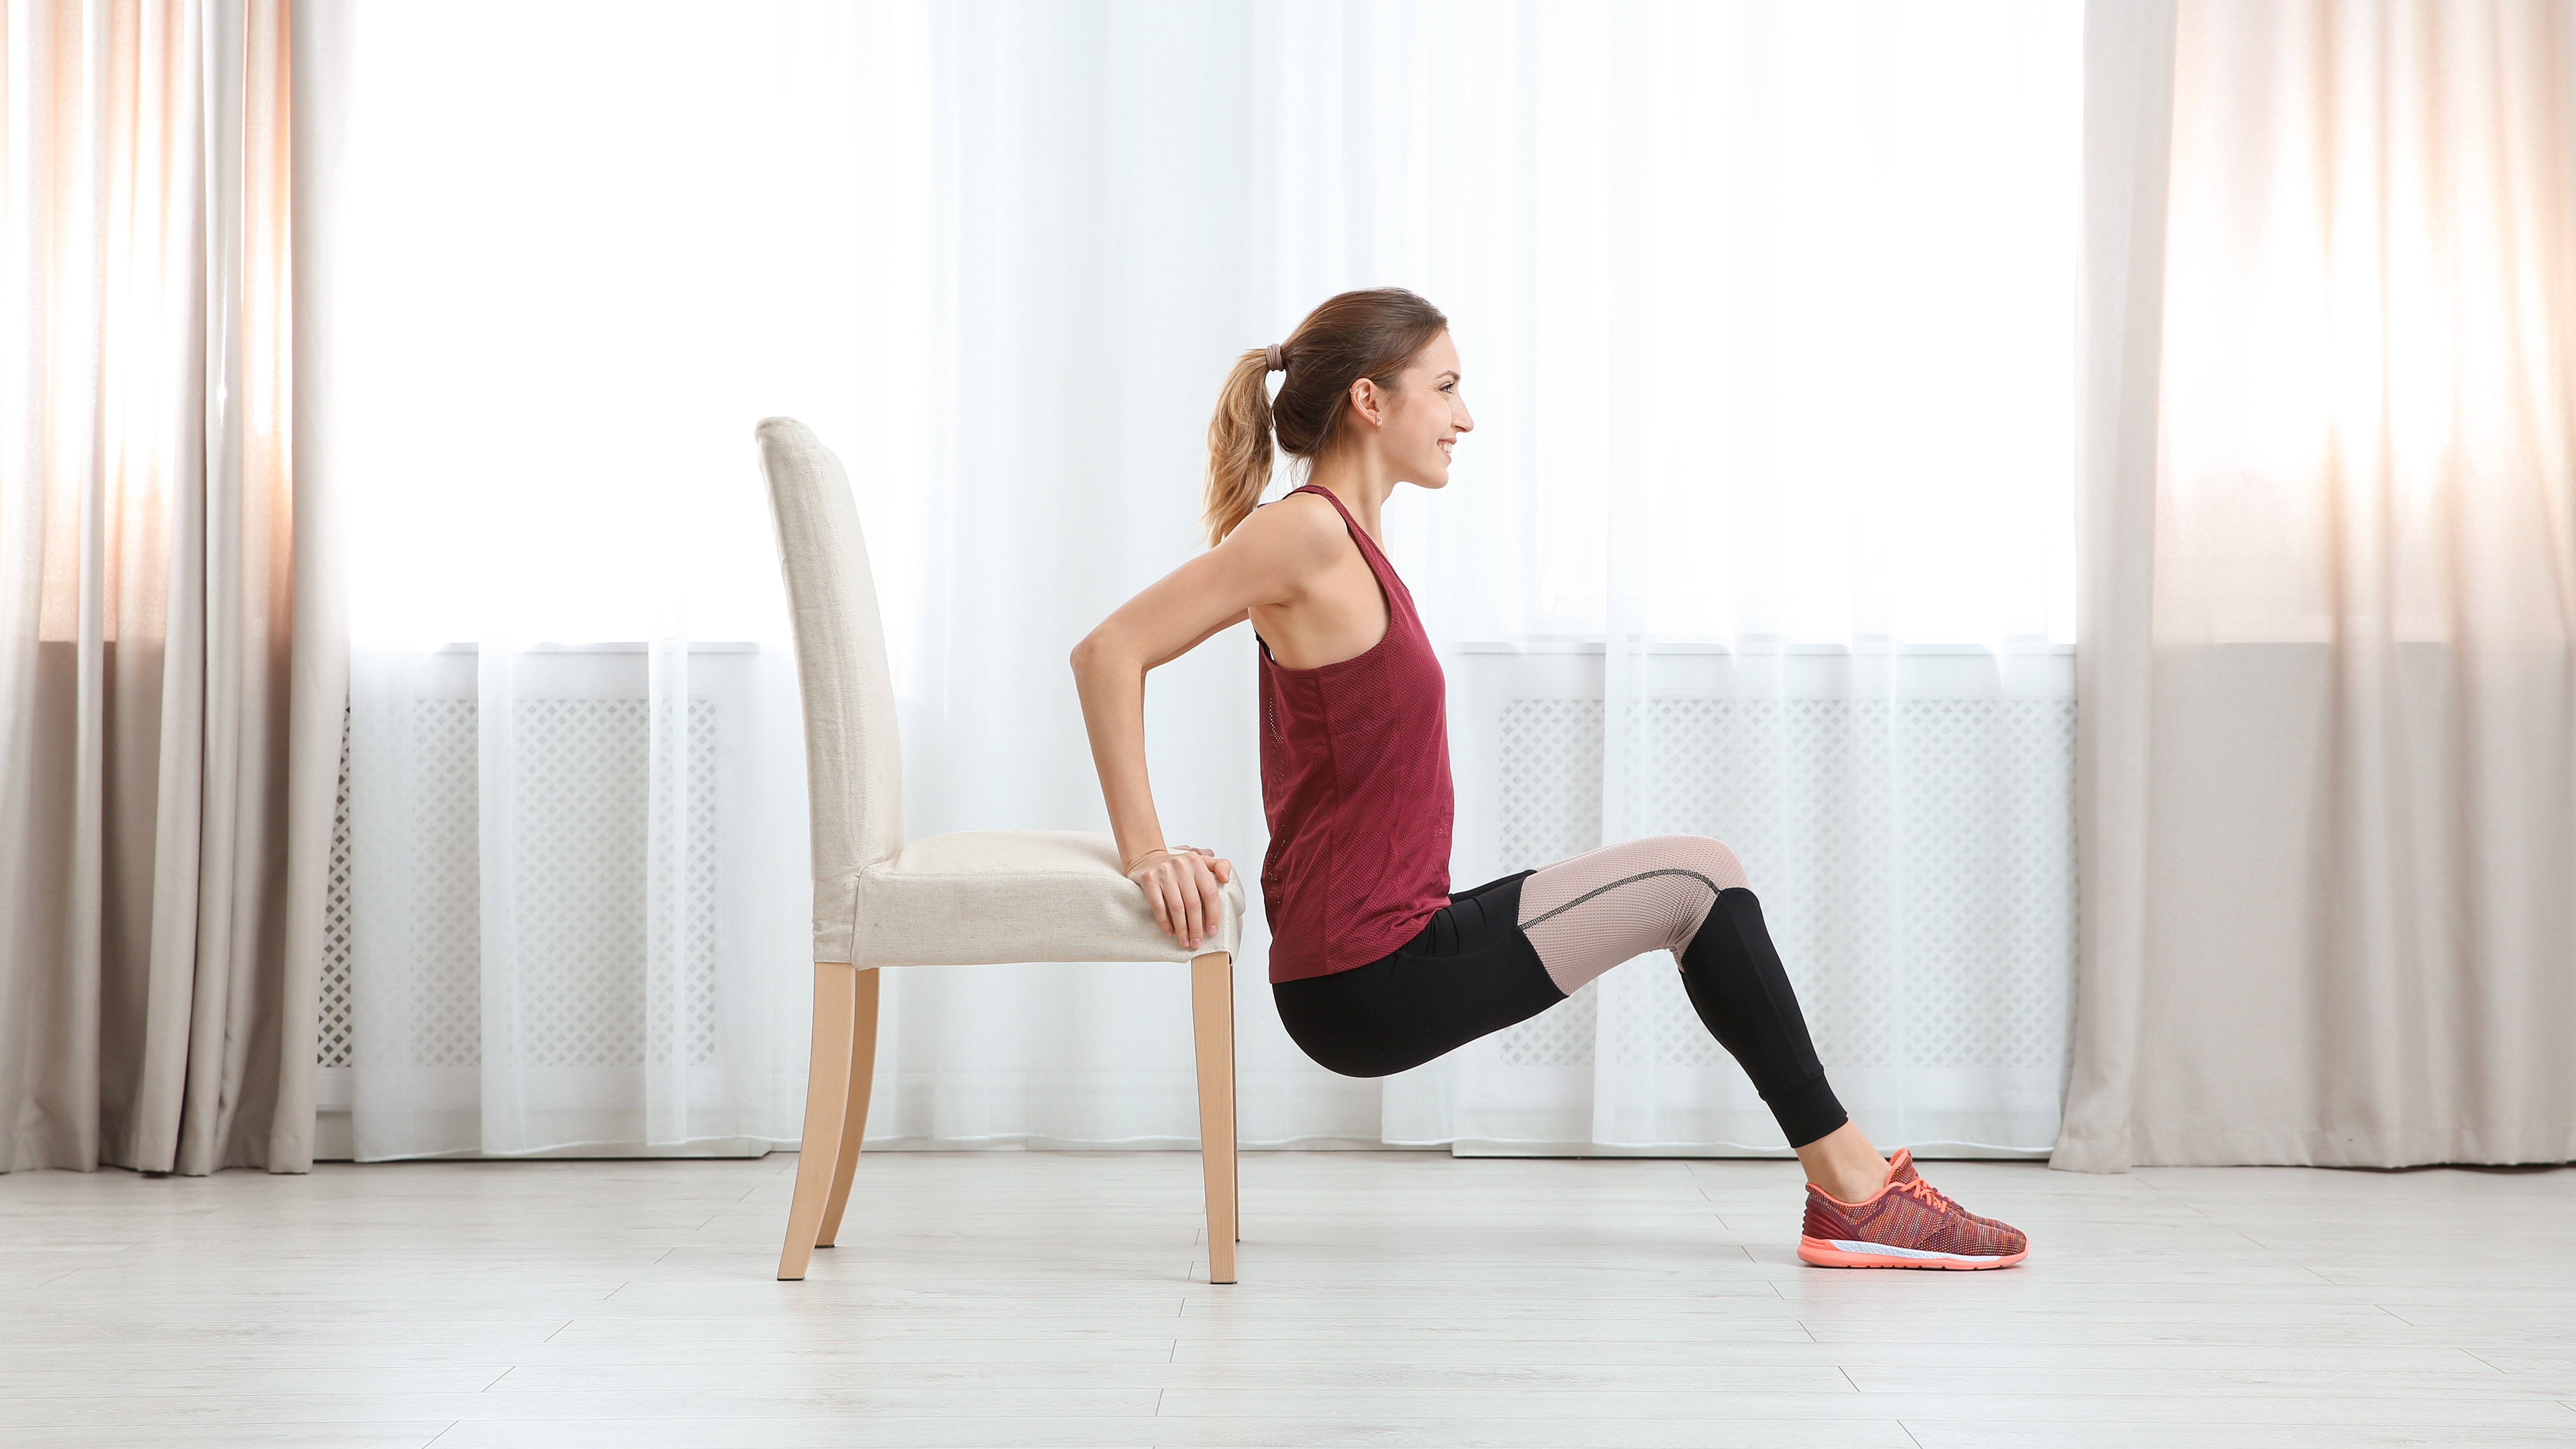 7 sitting exercises you can do at your desk